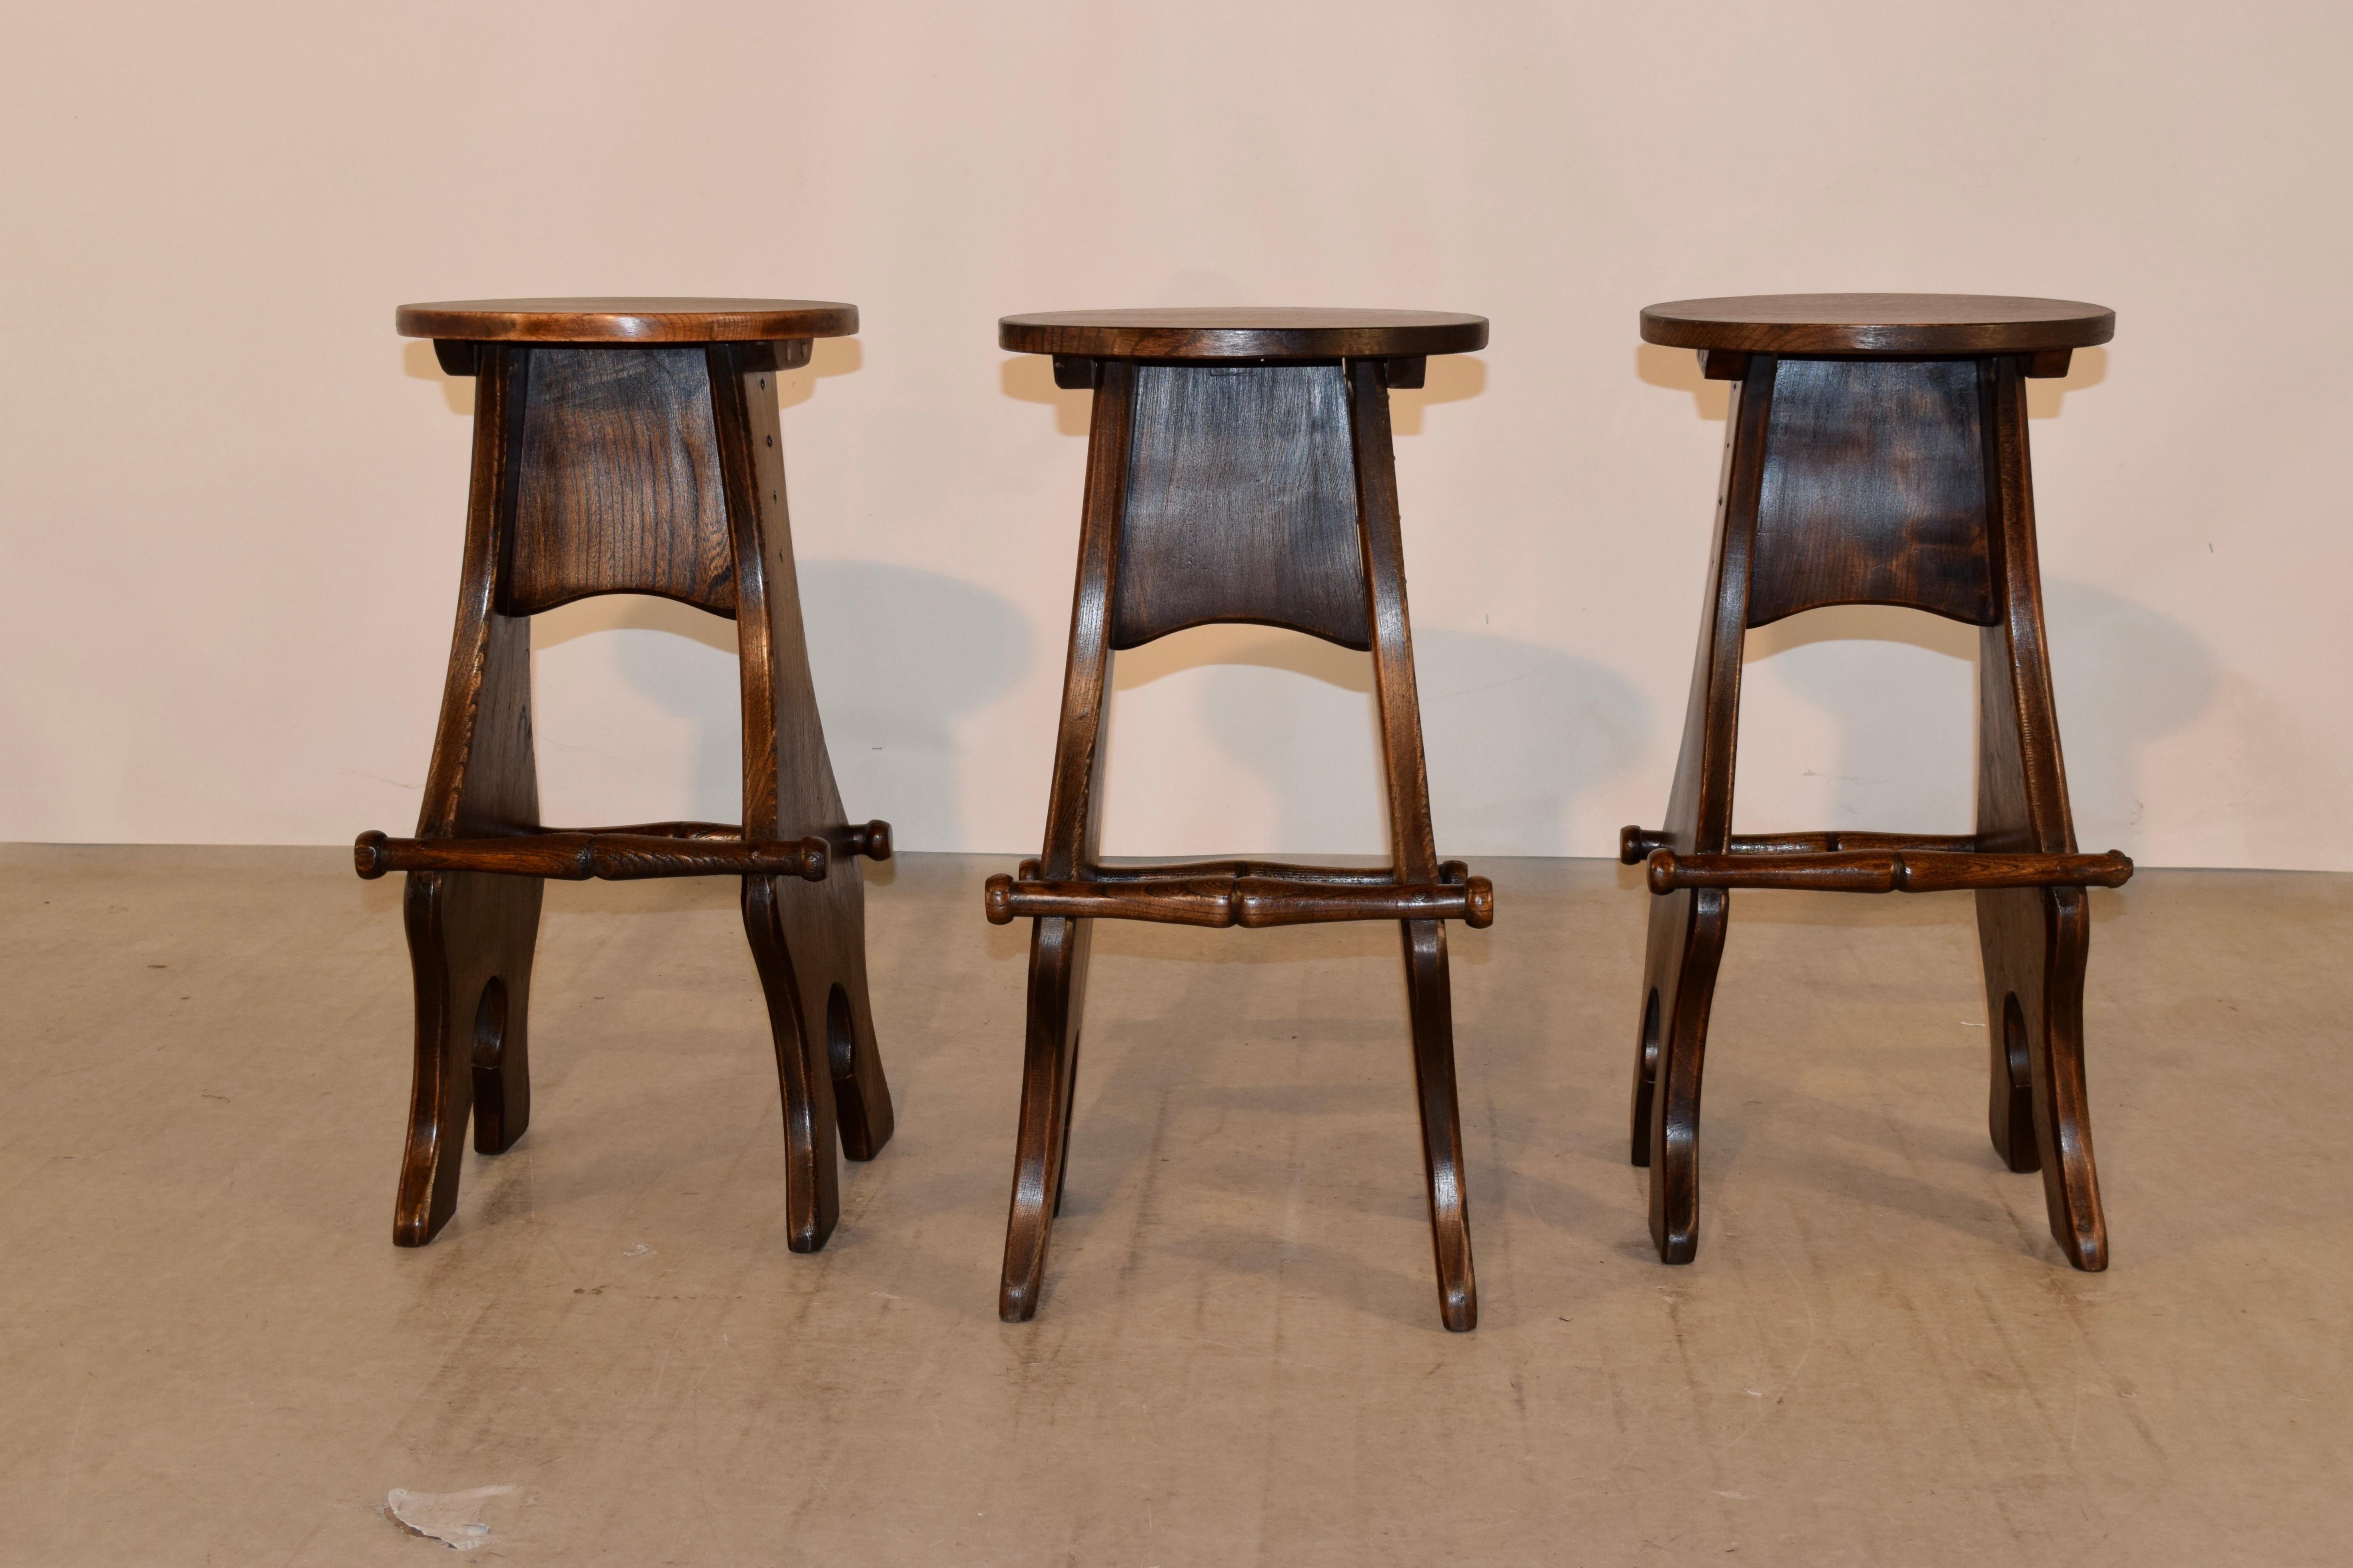 Set of three English barstools, made from oak and elm. The seats are made from oak and are resting on unusual bases made from elm with unique shape and two different length of hand-turned footrest - one side is for longer legs and the other side for